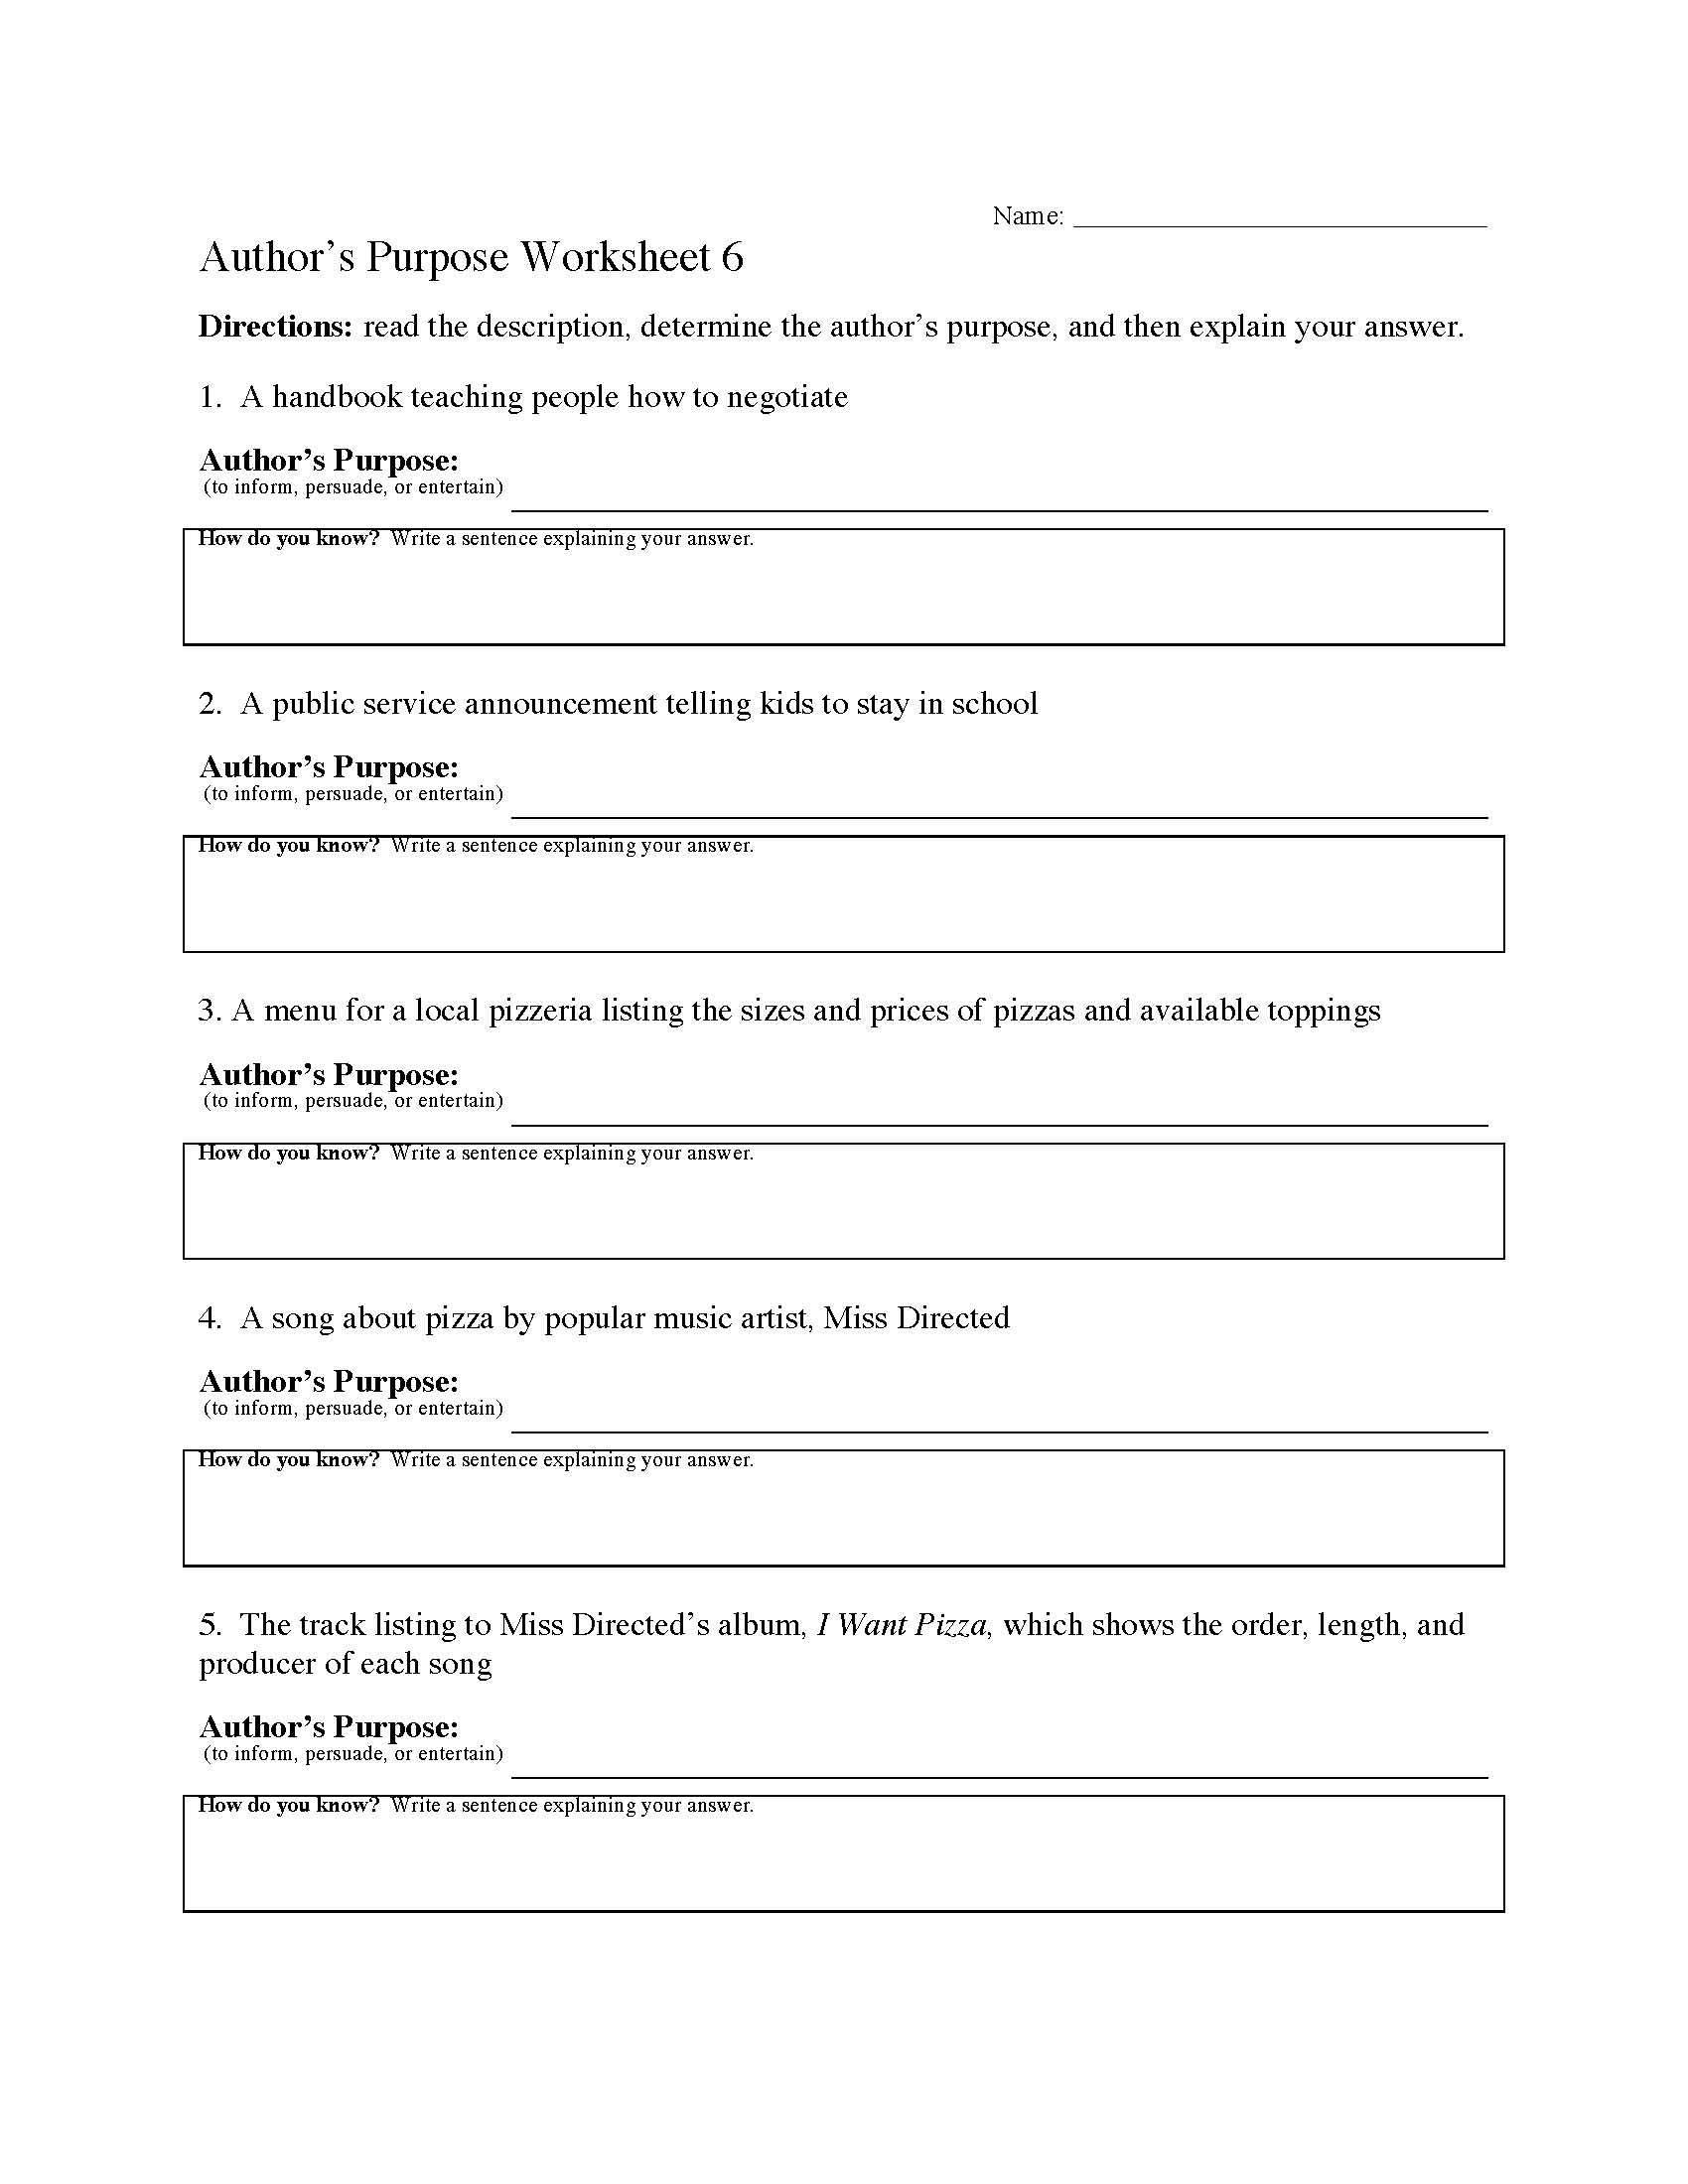 author-s-purpose-worksheet-6-preview